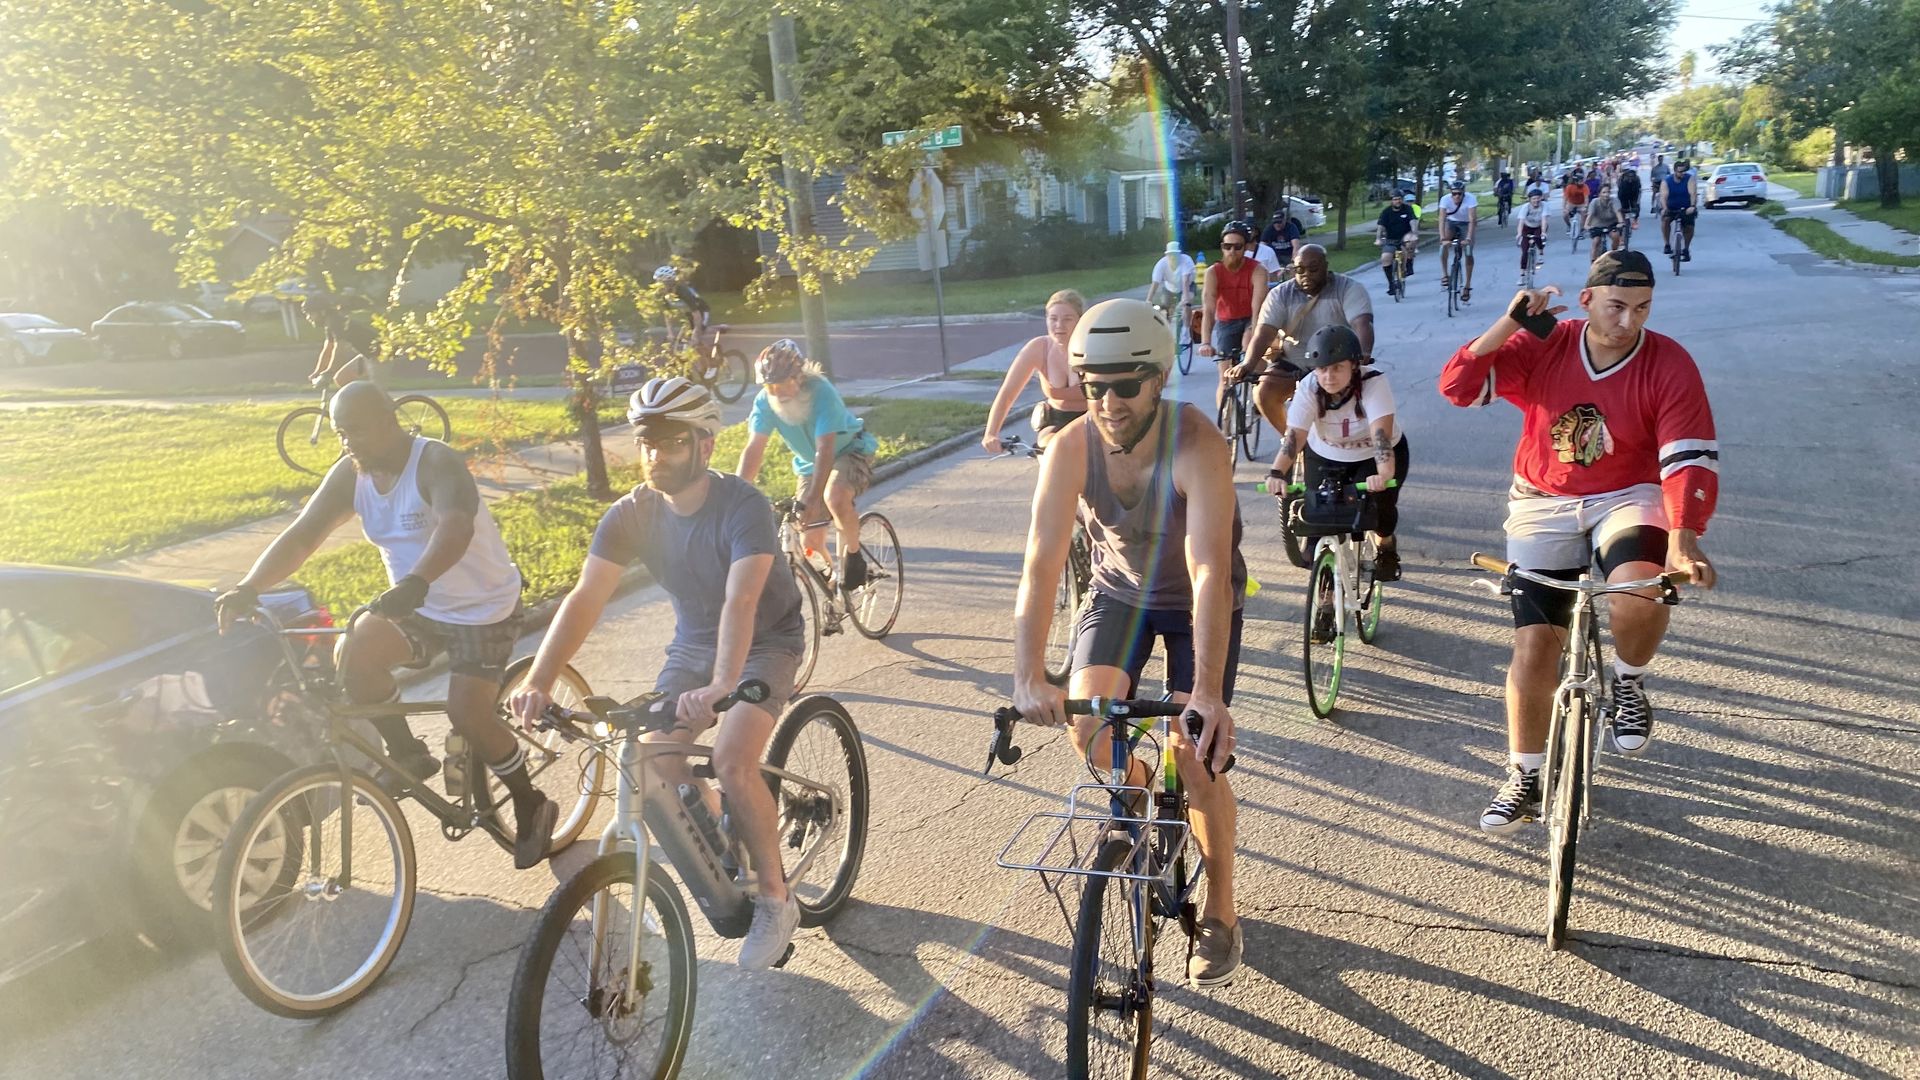 A group of people riding bicycles.